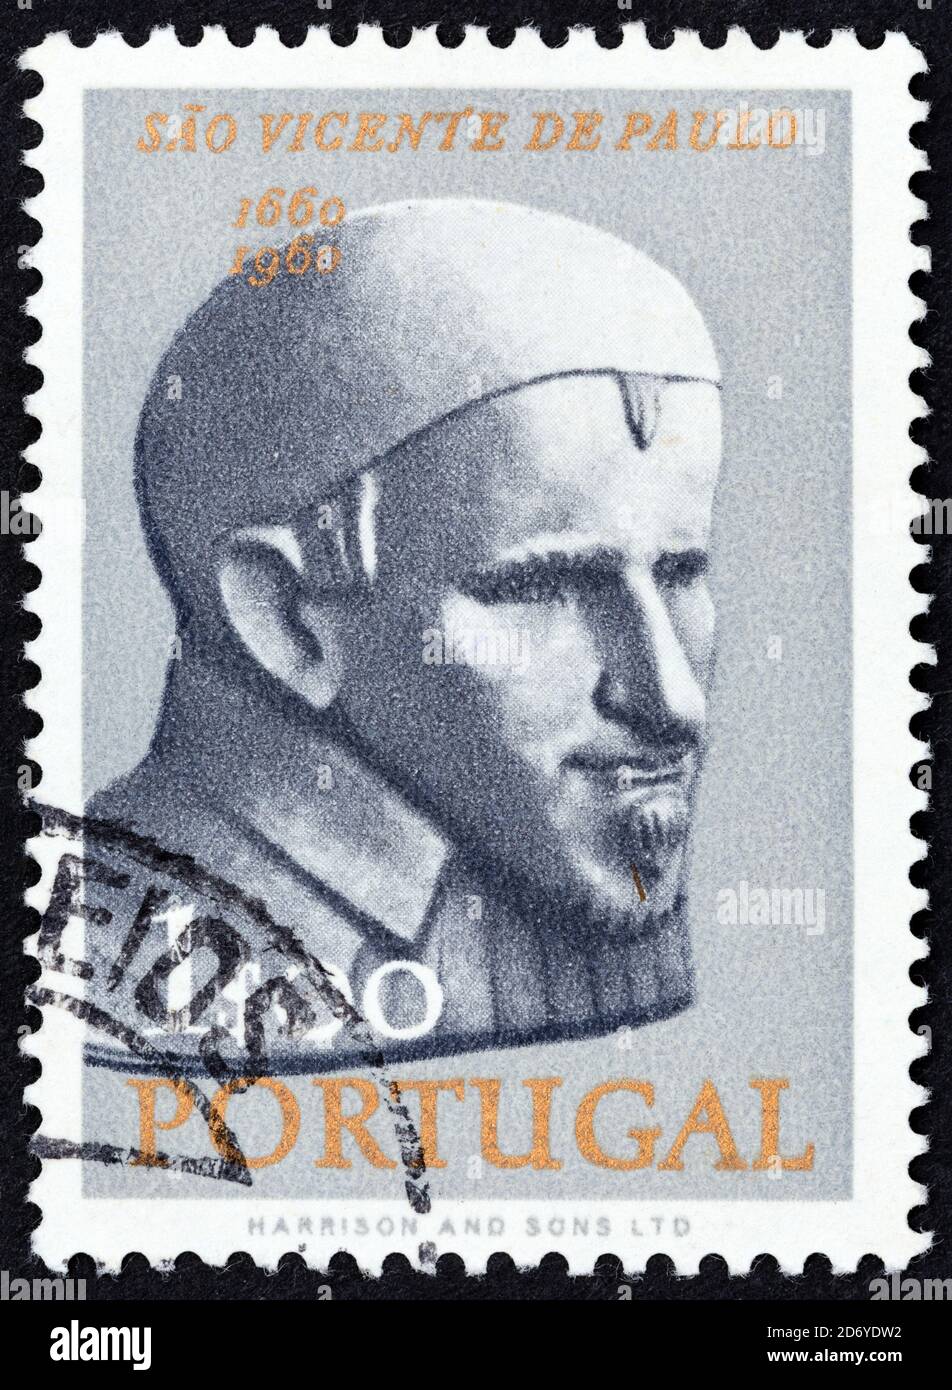 PORTUGAL - CIRCA 1963: A stamp printed in Portugal issued for the 300th death anniversary of St. Vincent de Paul shows St. Vincent de Paul, circa 1963. Stock Photo